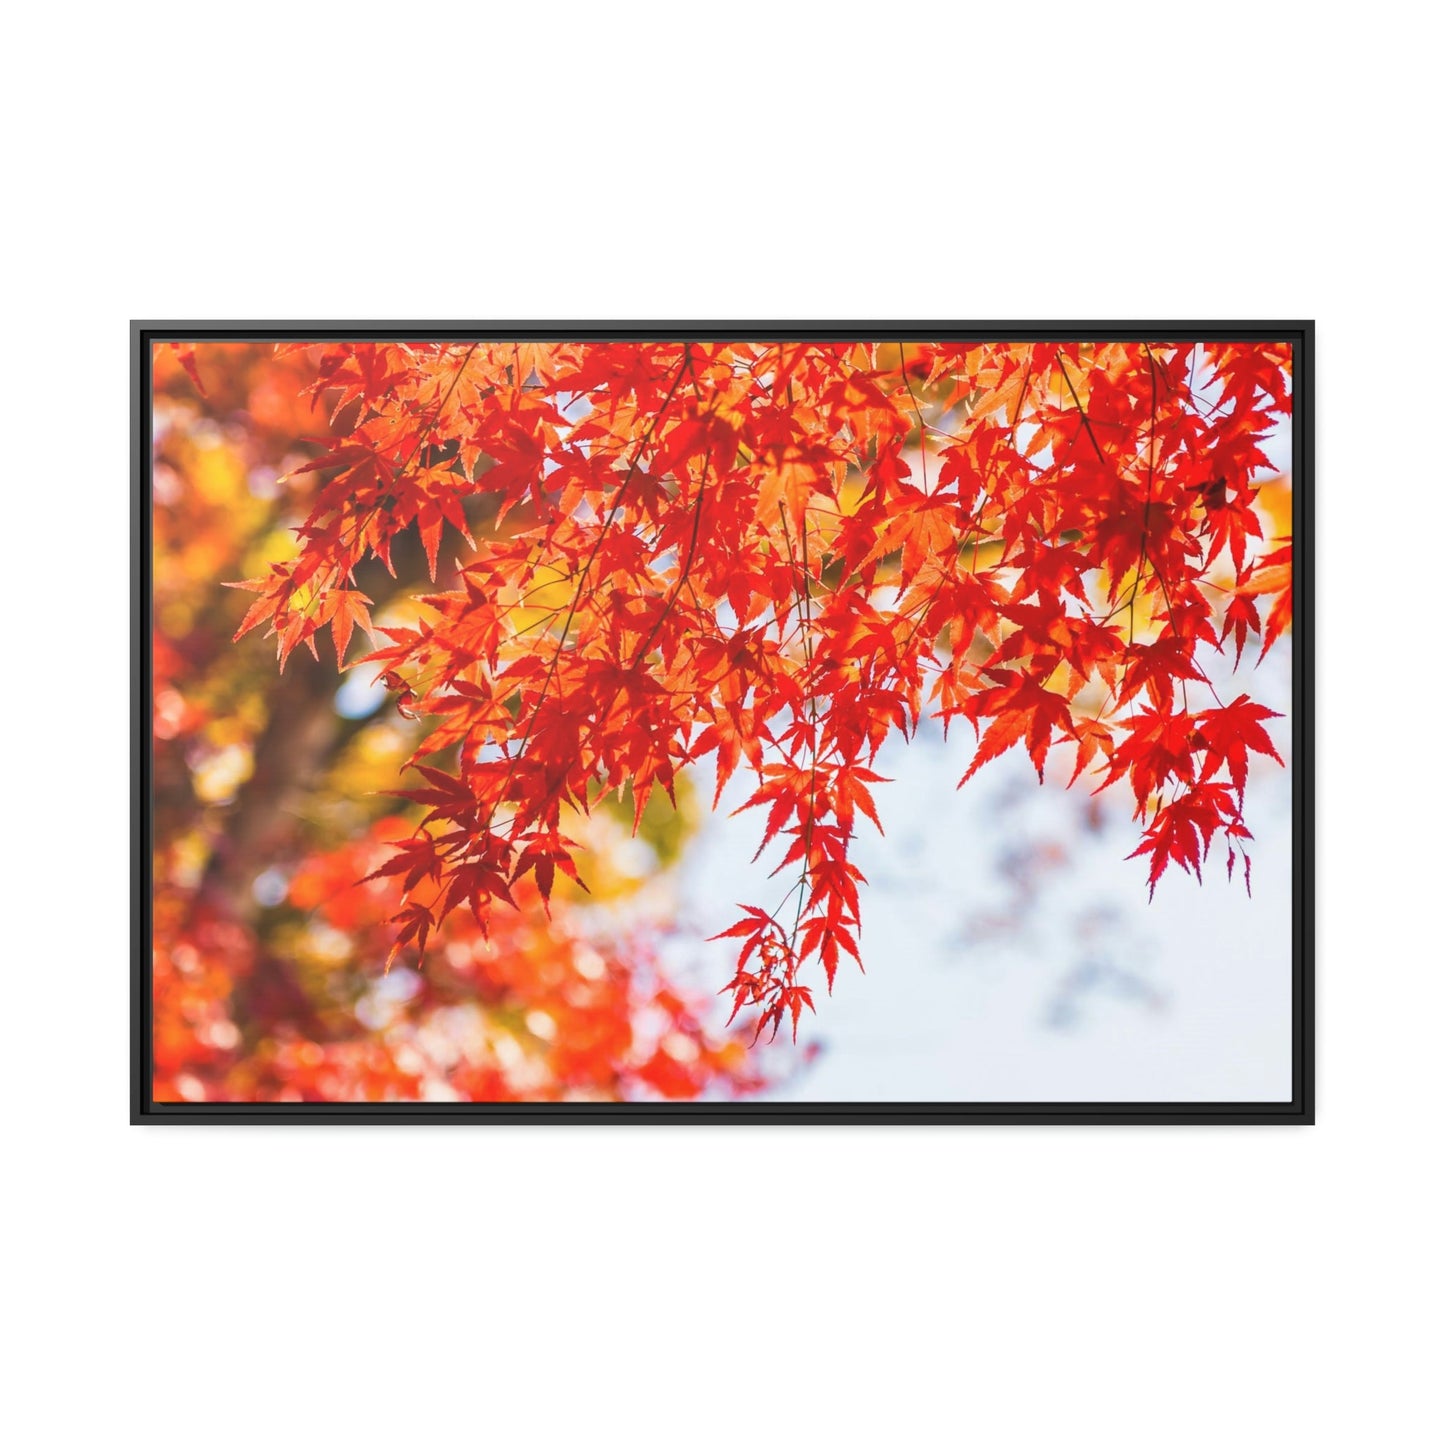 Shades of Red: Maple Trees in Fall